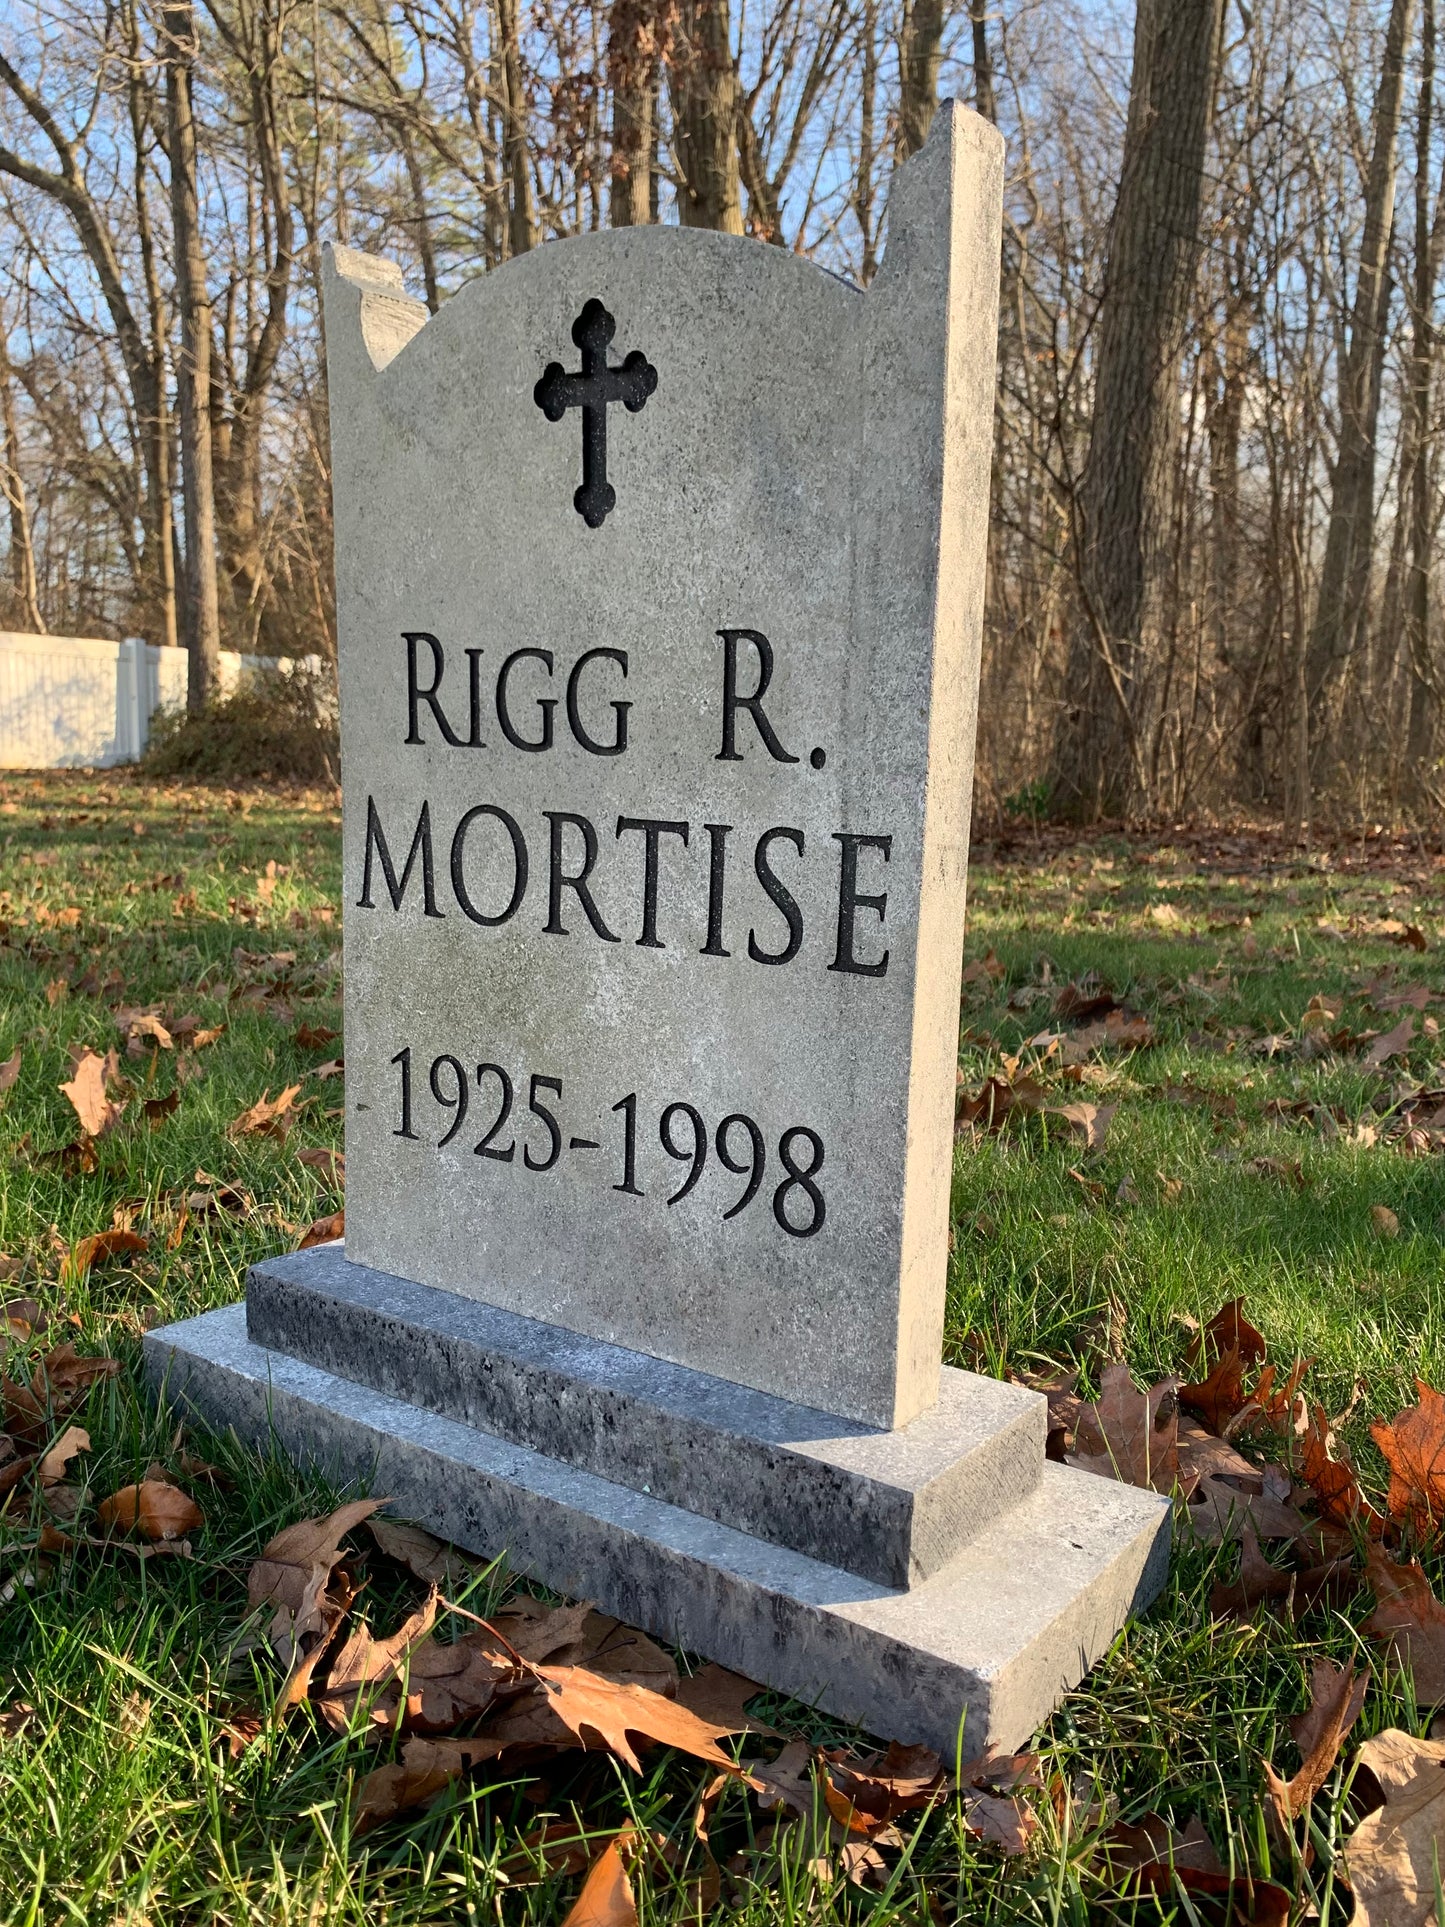 Rigg R. Mortise Tombstone